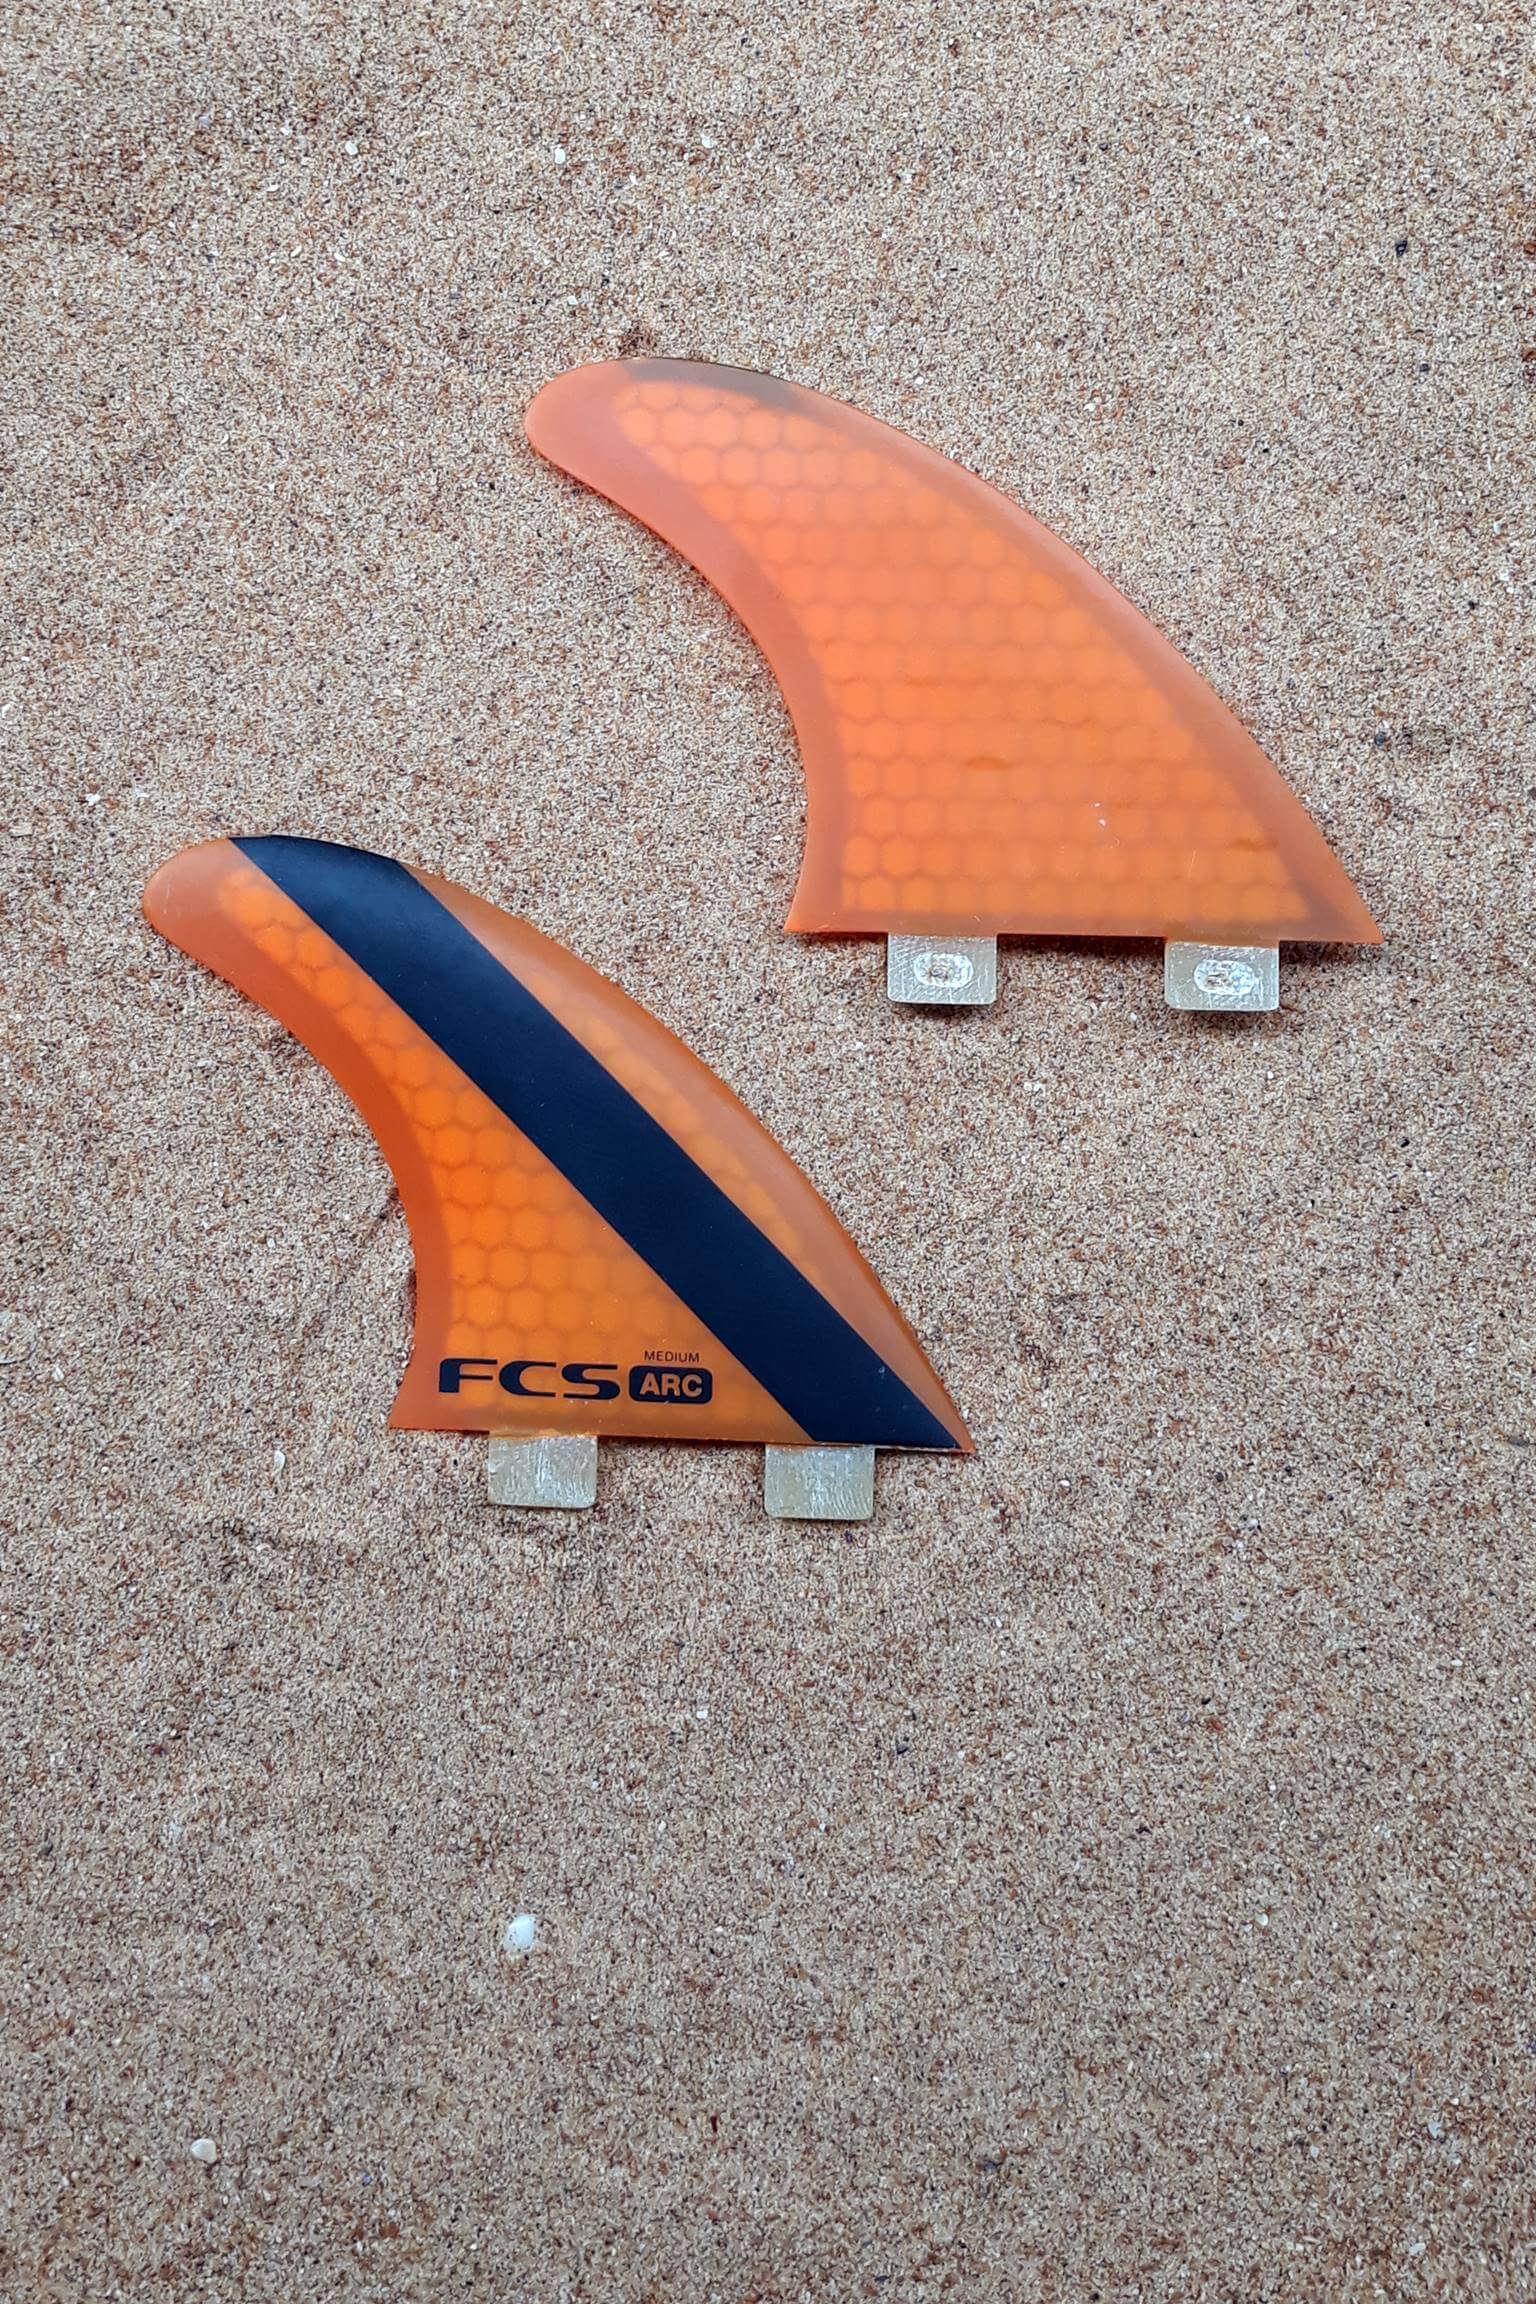 Z Sold – FINS – FCS ARC Medium (Right And Left Only)